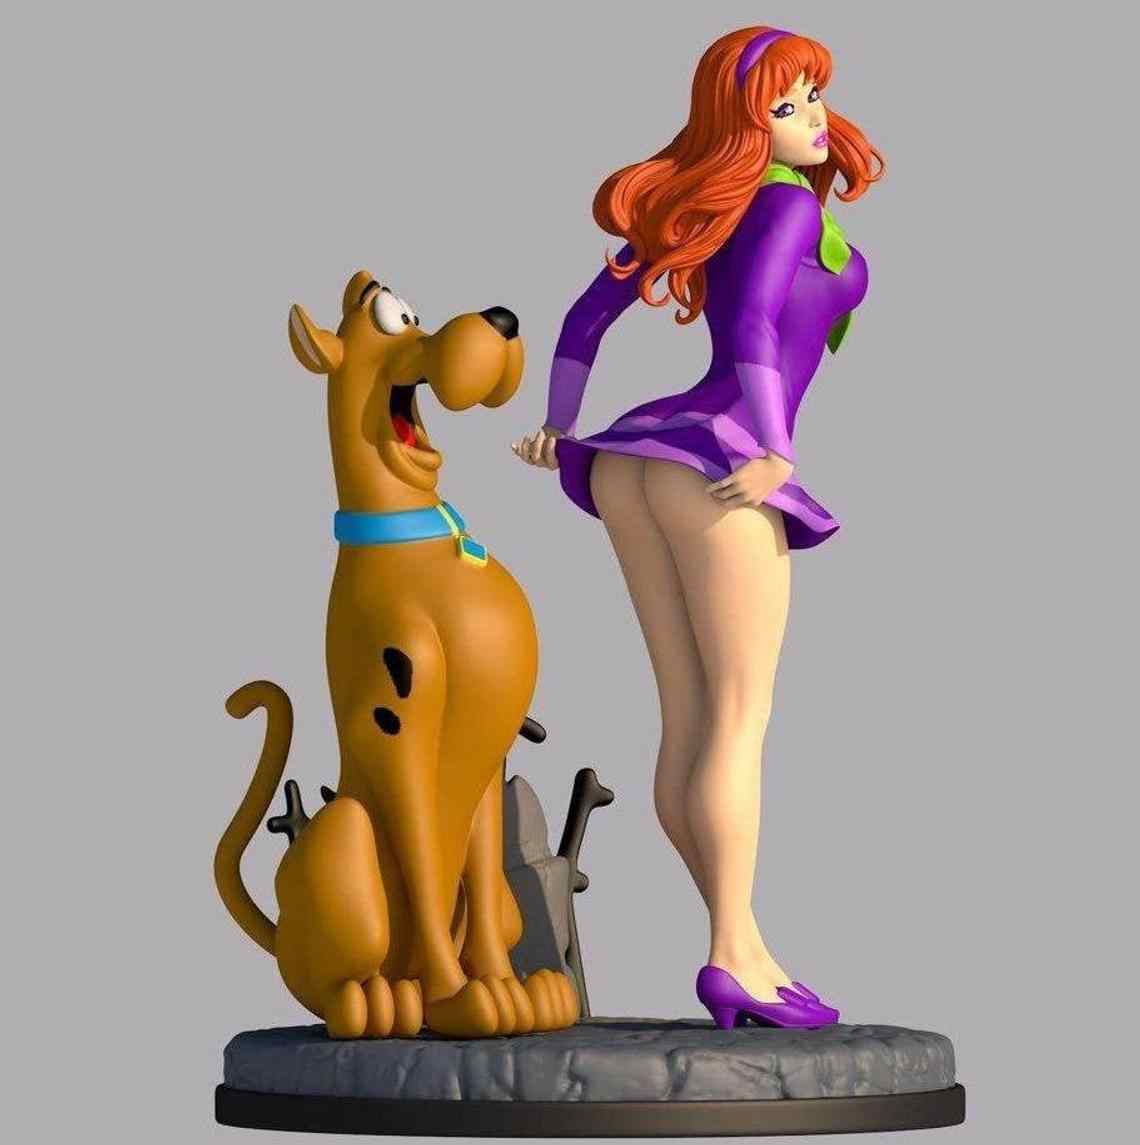 Sexy Daphne and Scooby Doo Diorama Statue. 